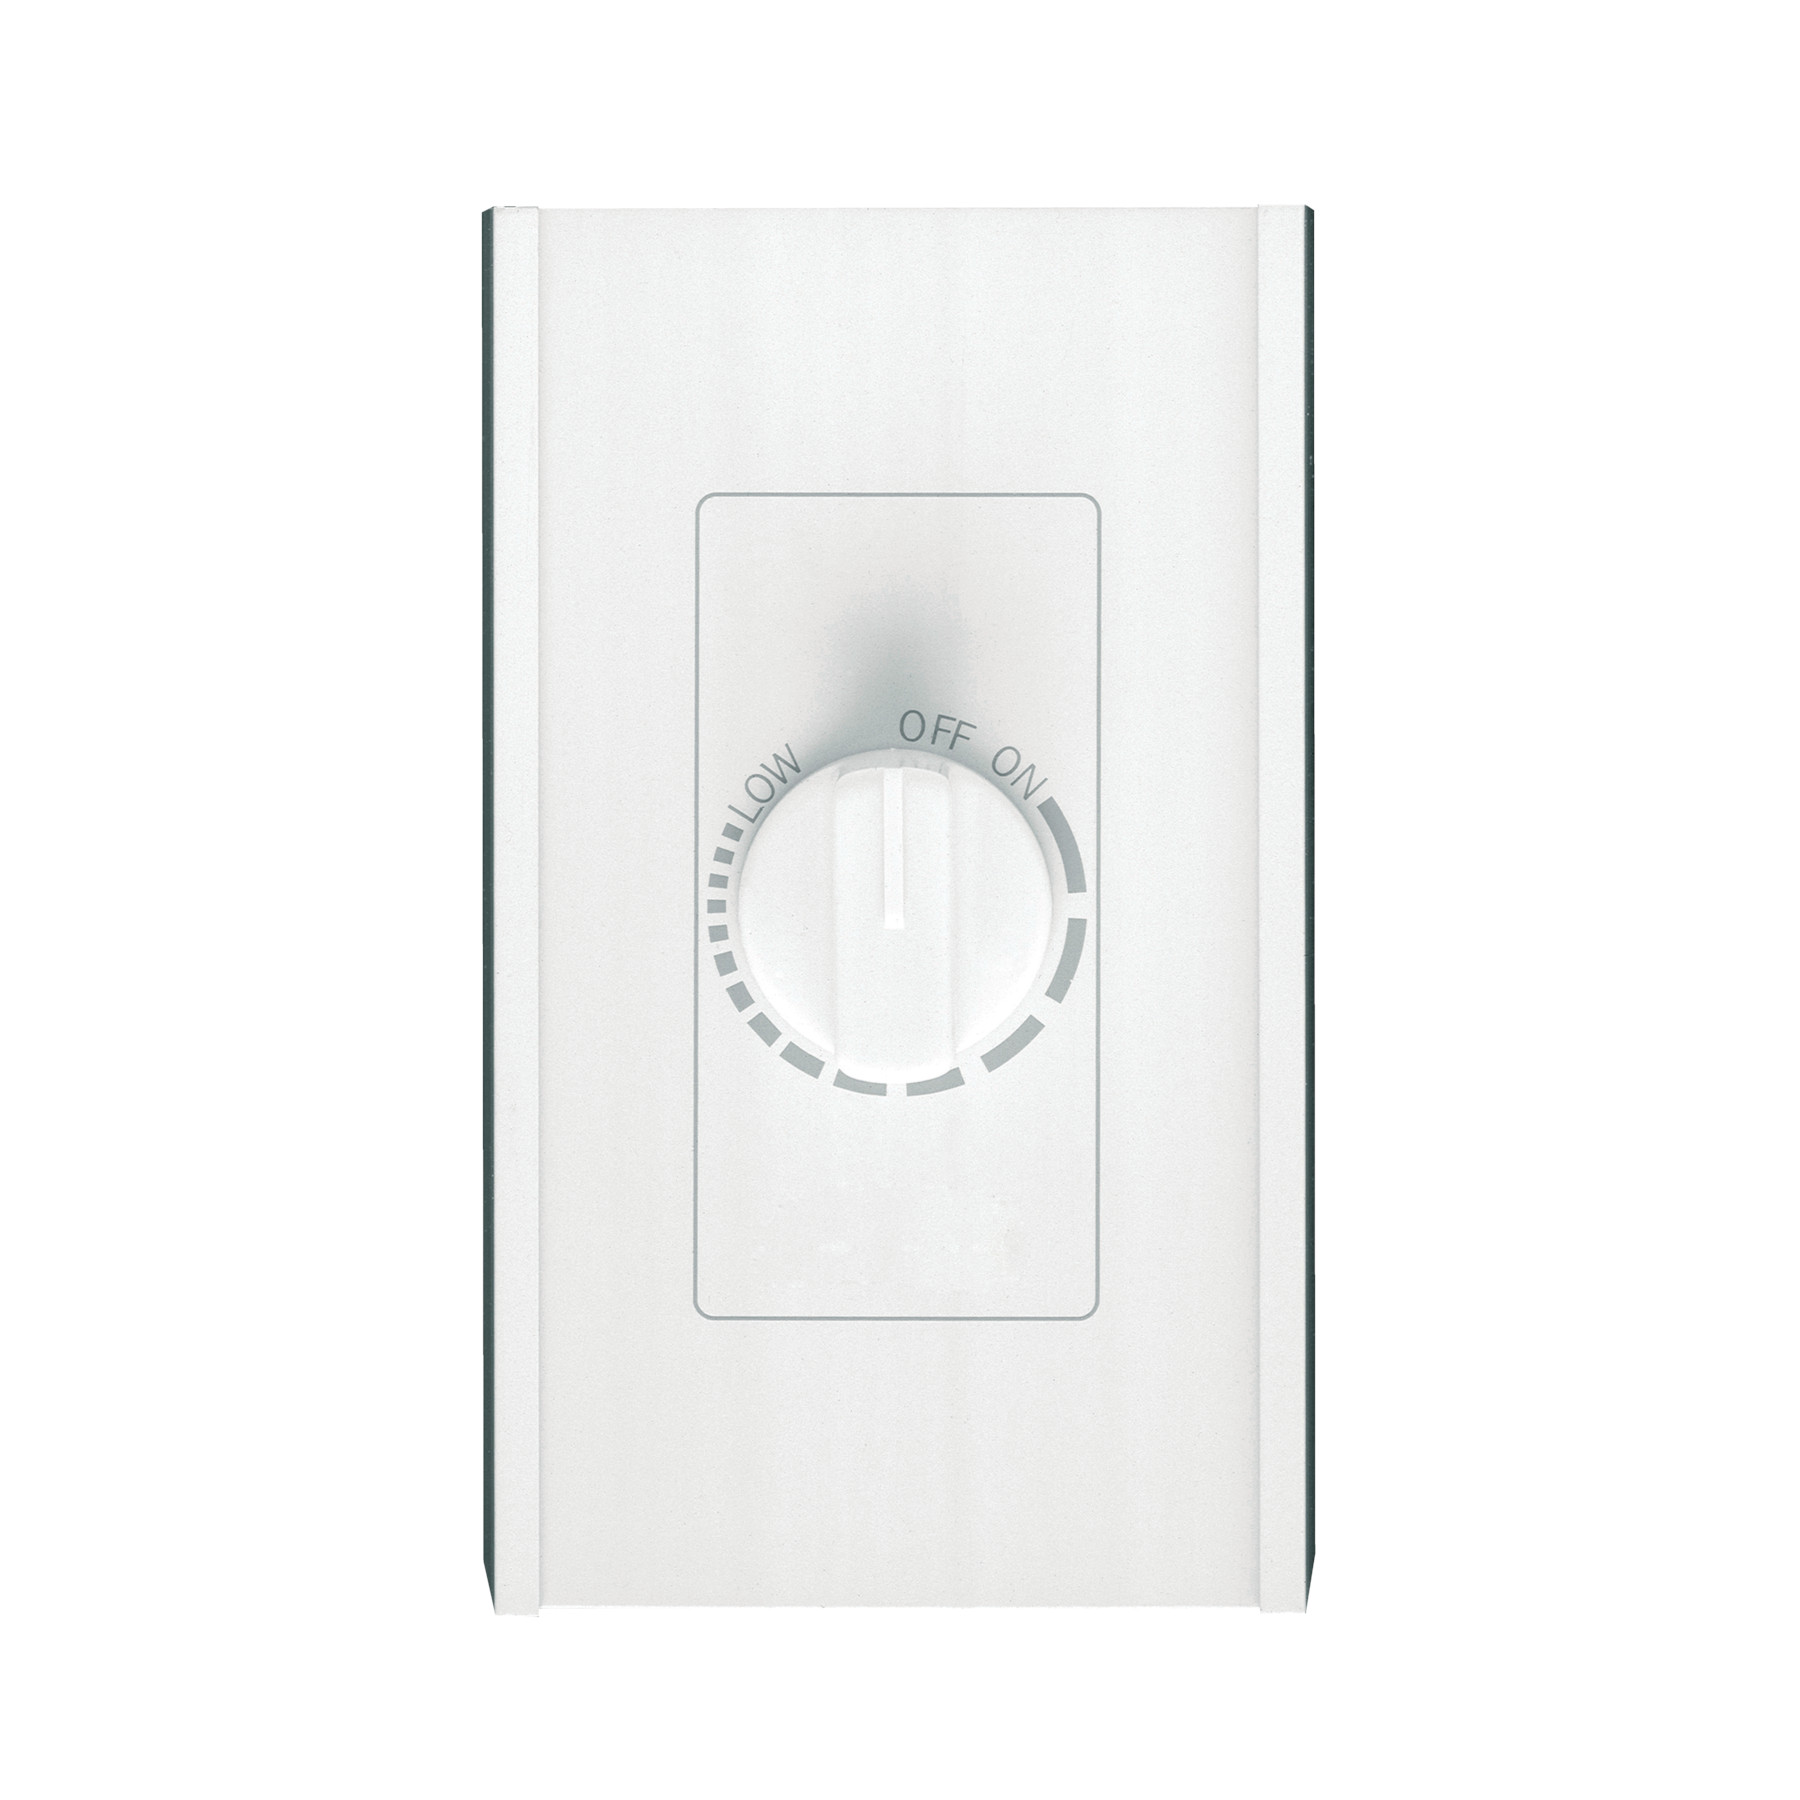 **DISCONTINUED** Broan-NuTone® Variable Speed Wall Control, White